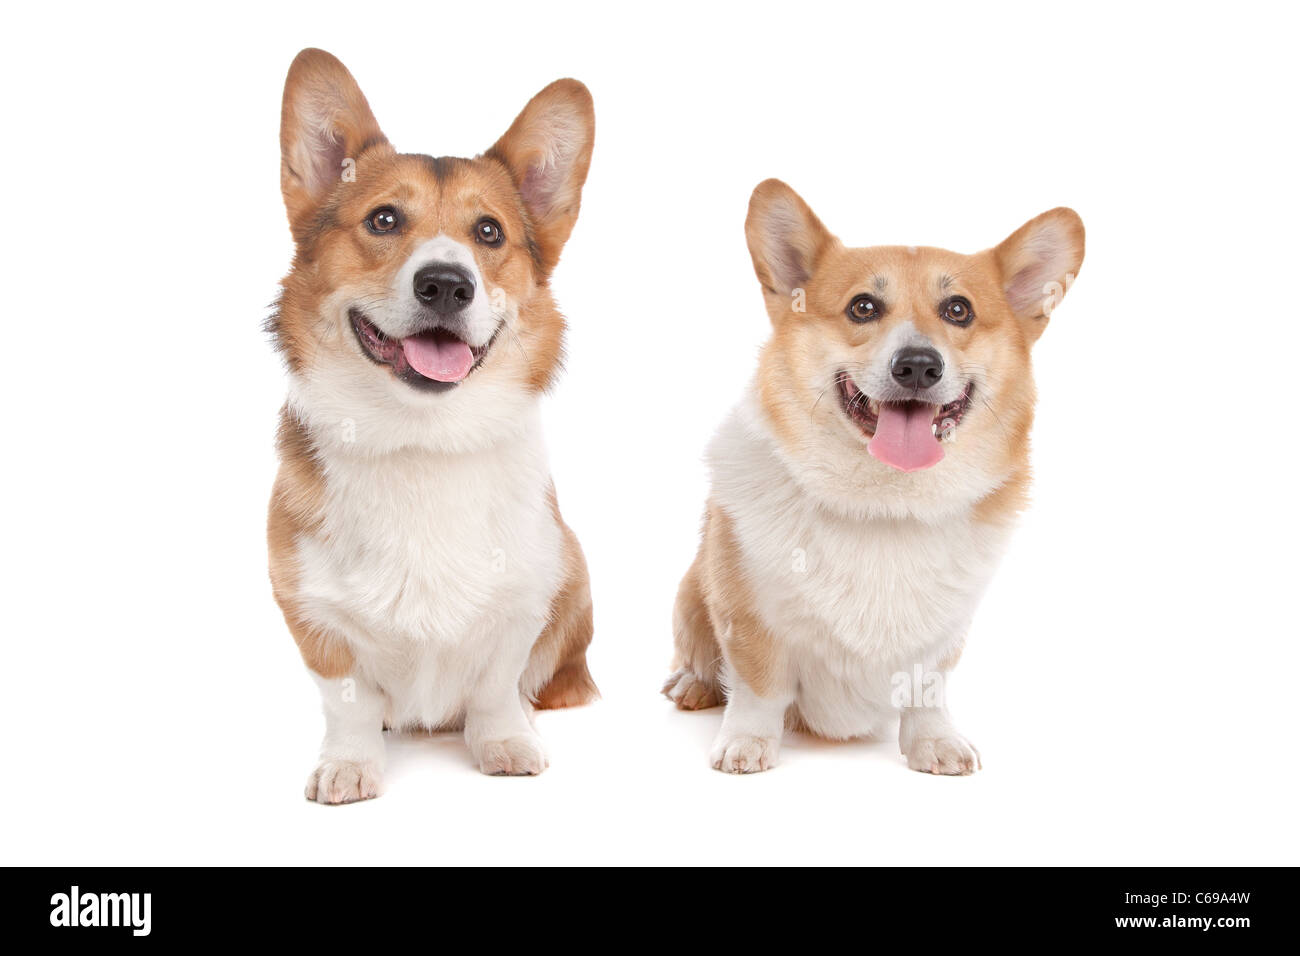 Pembroke Welsh Corgi in front of a white background Stock Photo